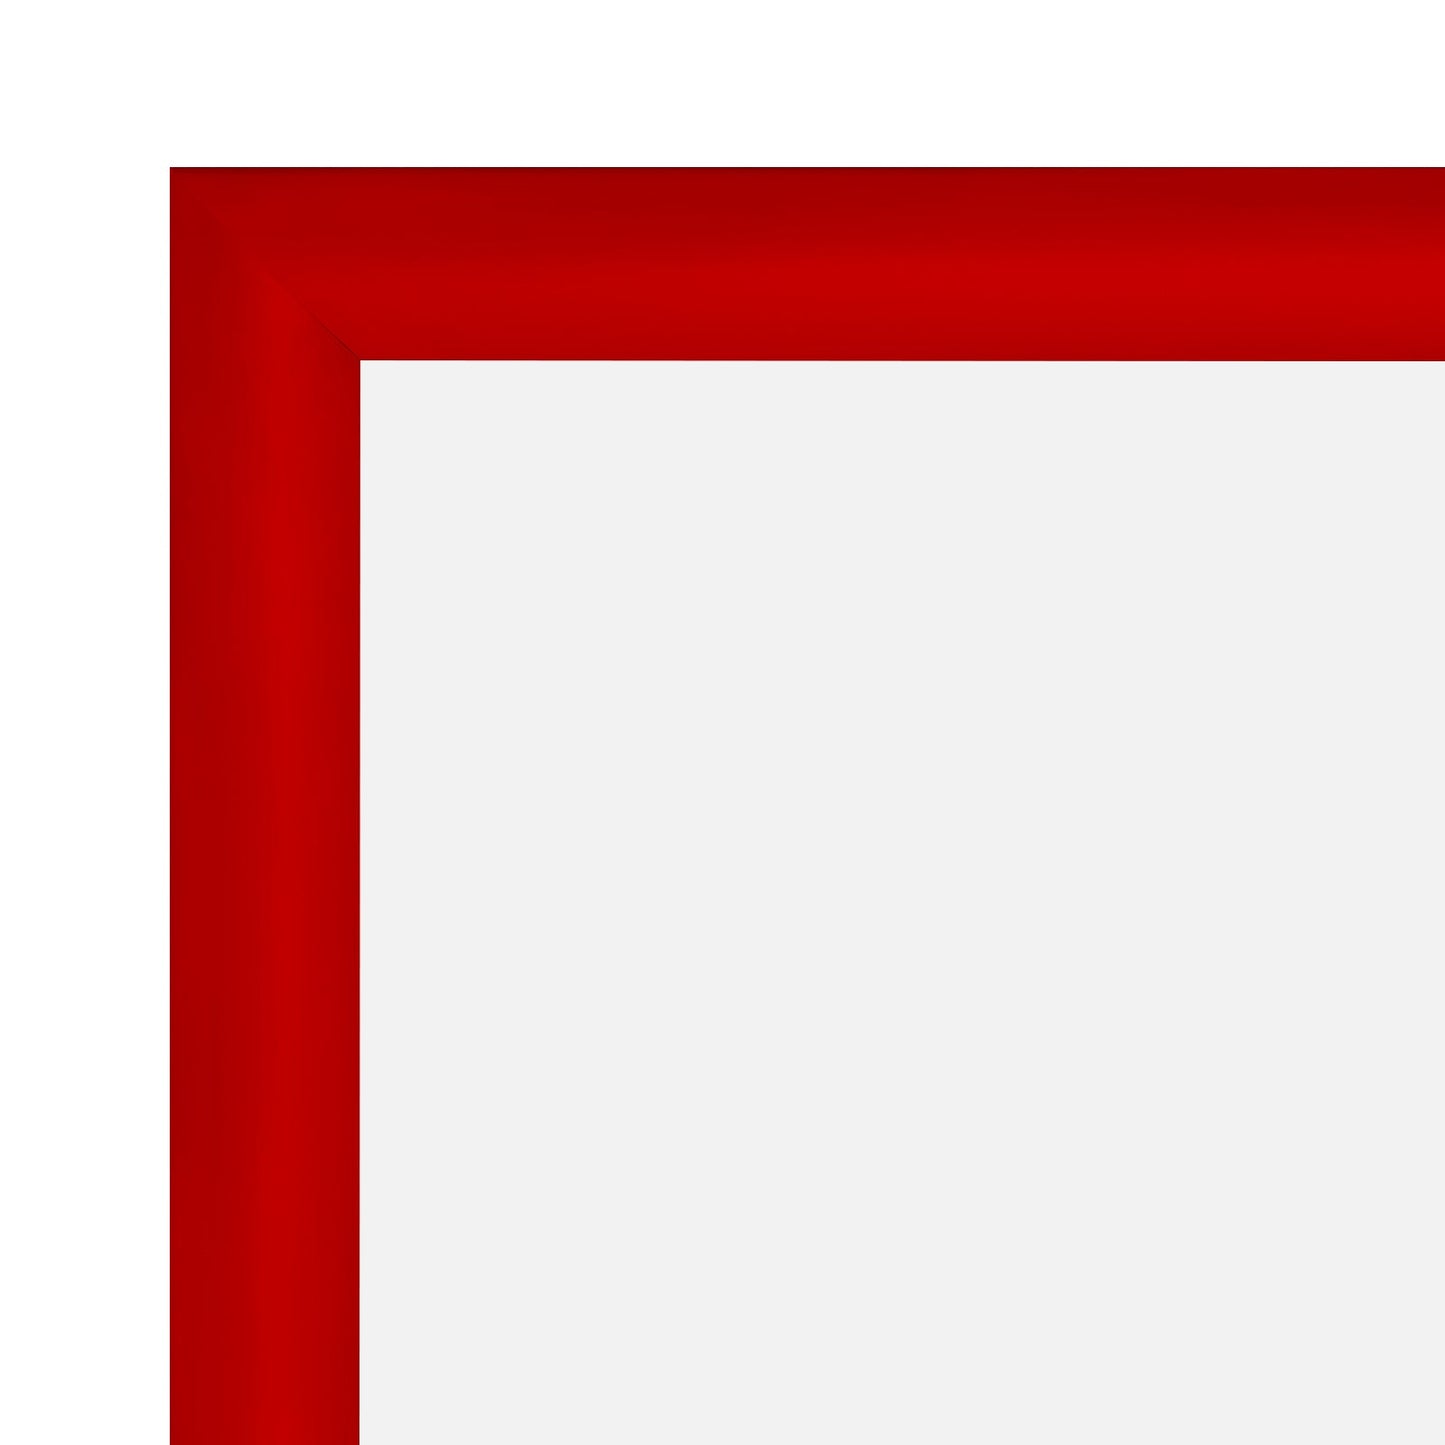 12x16 Red SnapeZo® Snap Frame - 1.2" Profile